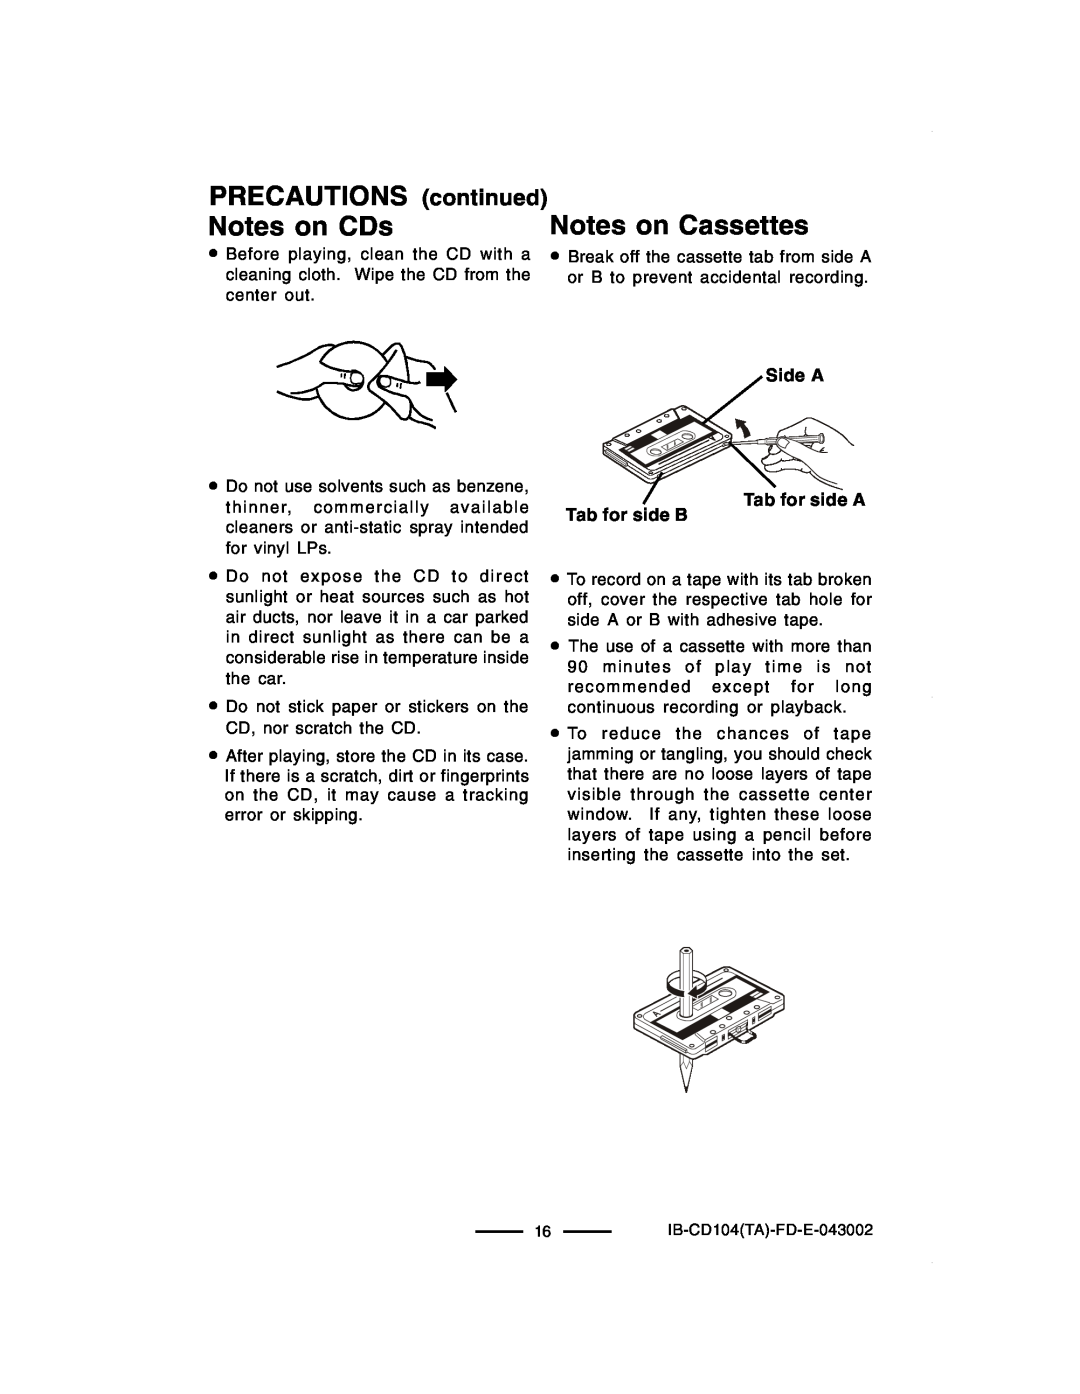 Lenoxx Electronics CD-104 PRECAUTIONS continued Notes on CDs, Notes on Cassettes, Tab for side B, Side A Tab for side A 